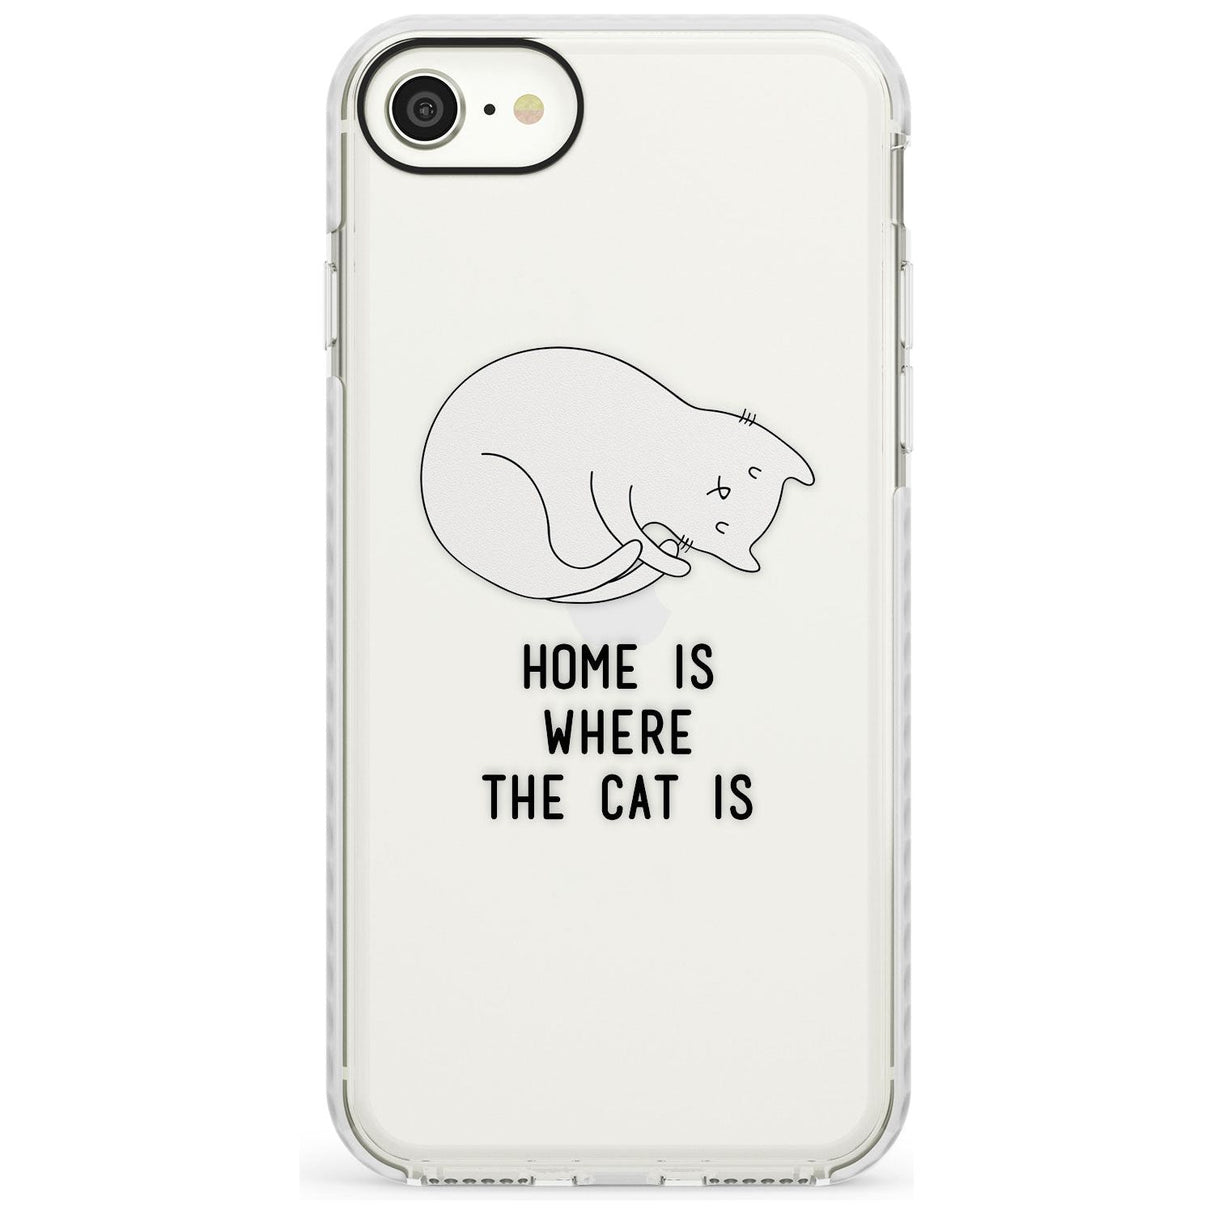 Home Is Where the Cat is Slim TPU Phone Case for iPhone SE 8 7 Plus